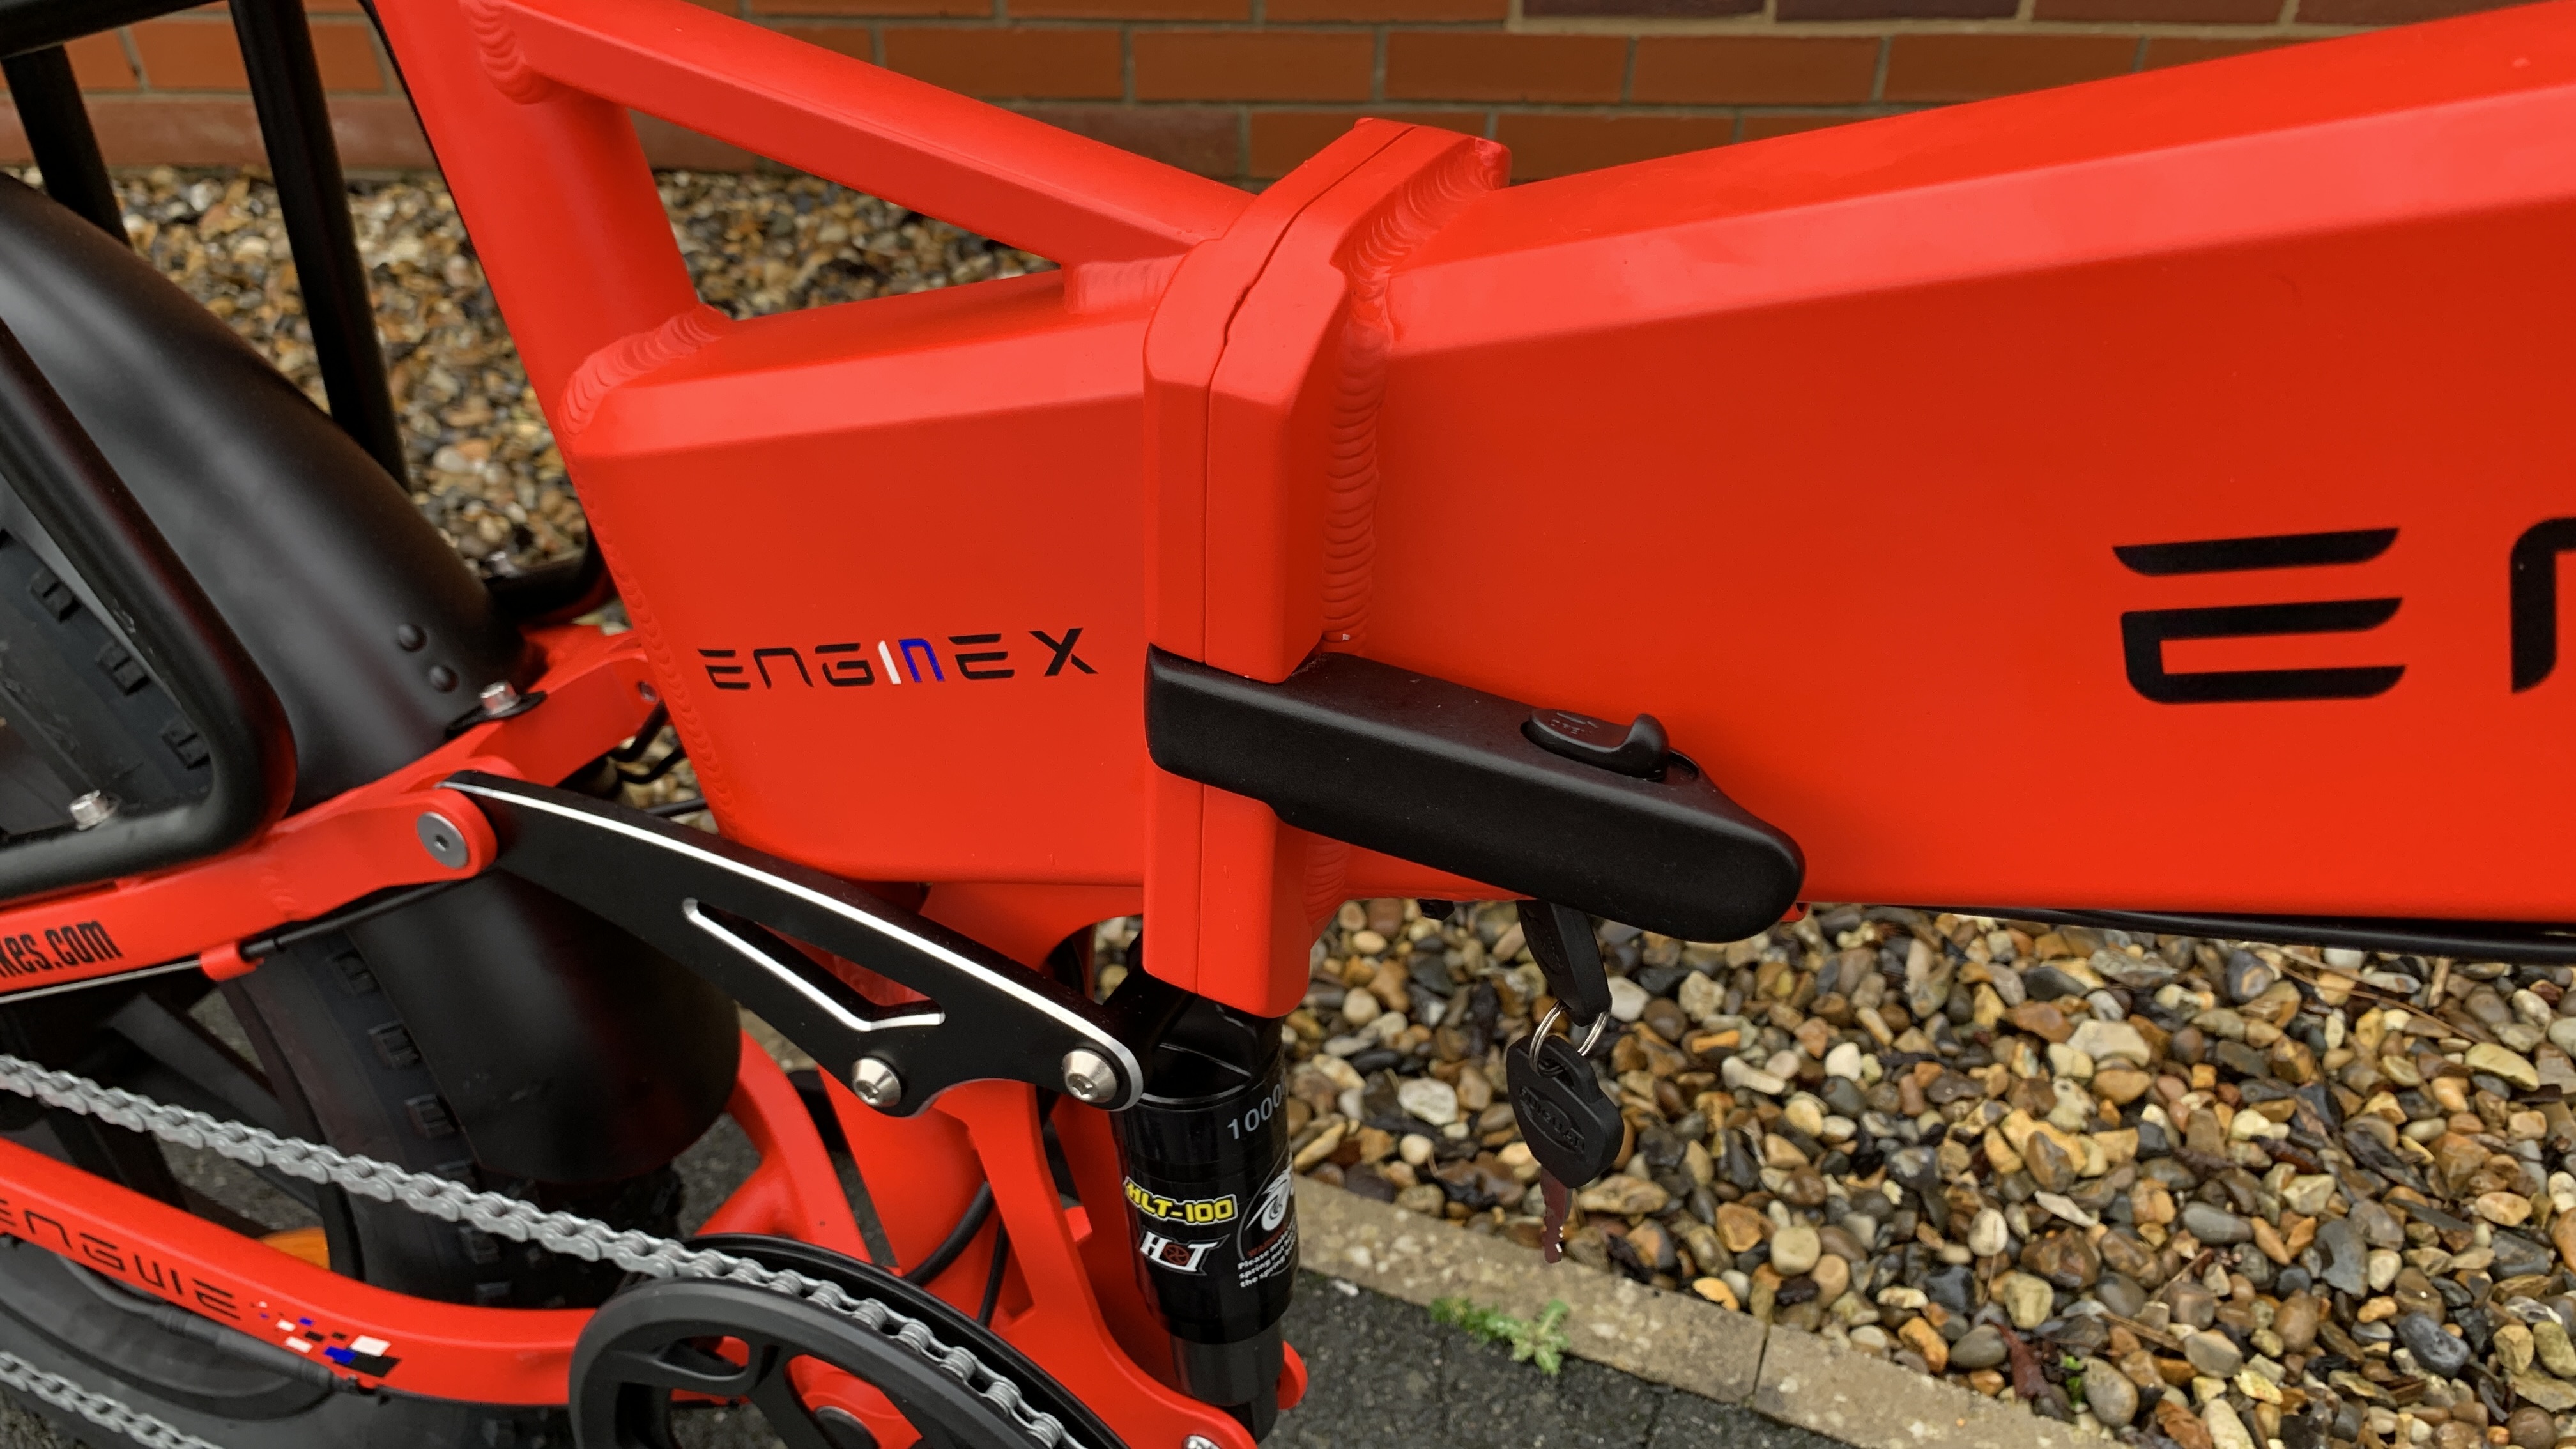 Engwe Engine X battery is located in the frame